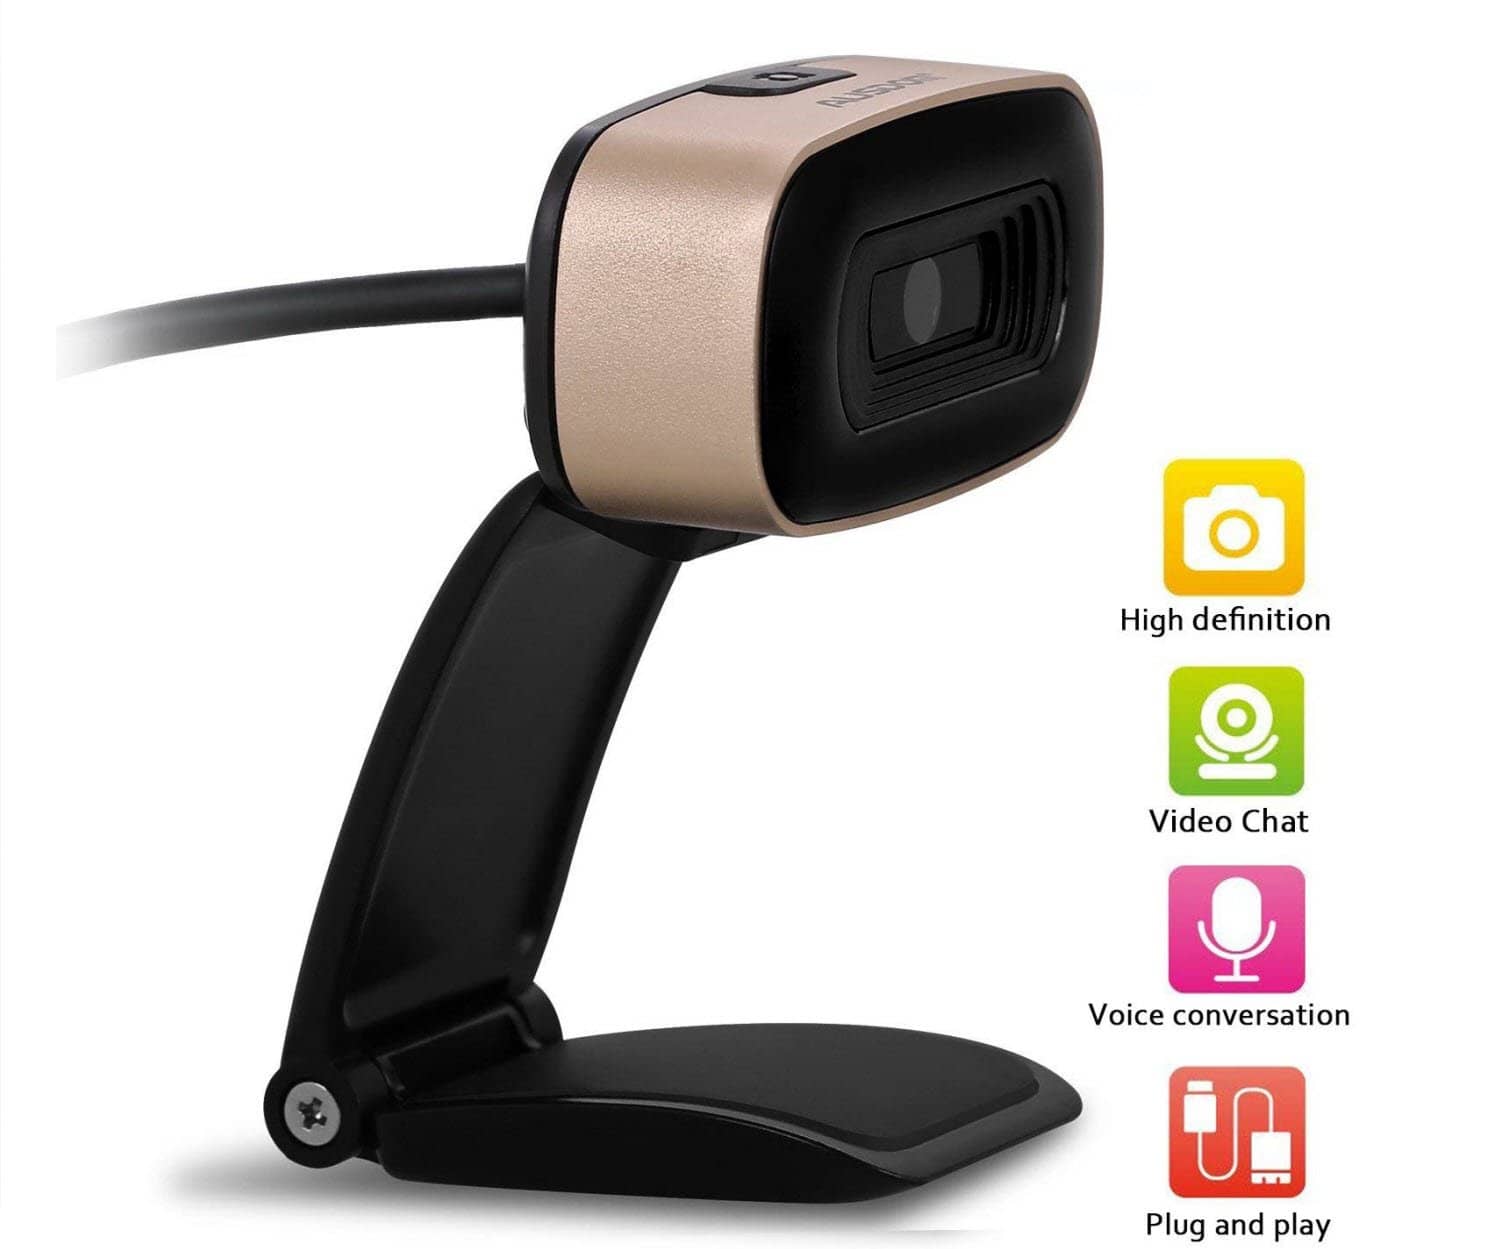 Ausdom HD Webcam, Widescreen 720P Web Camera with Built-in Noise Reduction Microphone